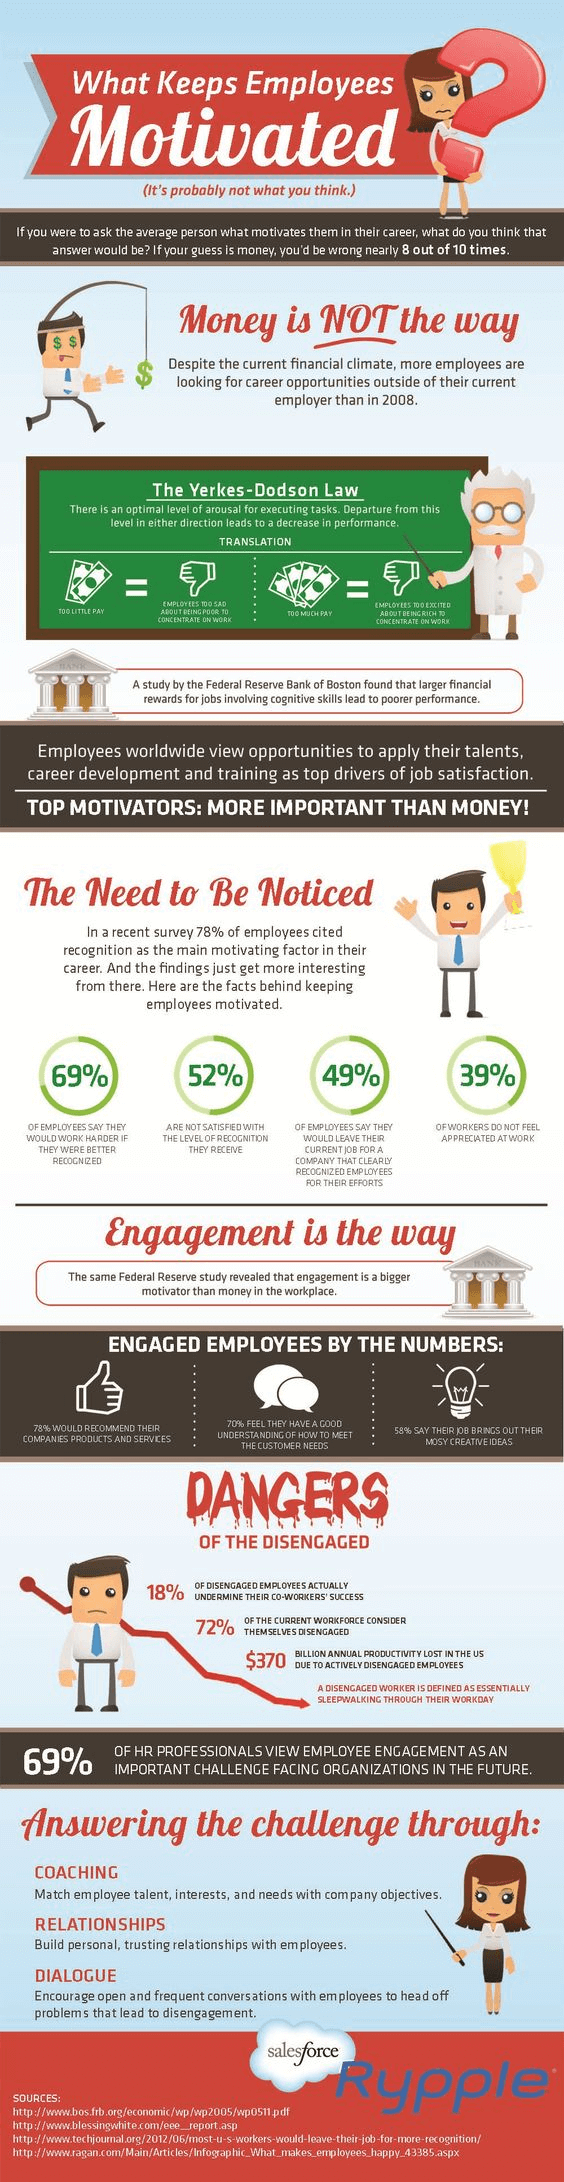 infographic-what-keeps-employee-motivated